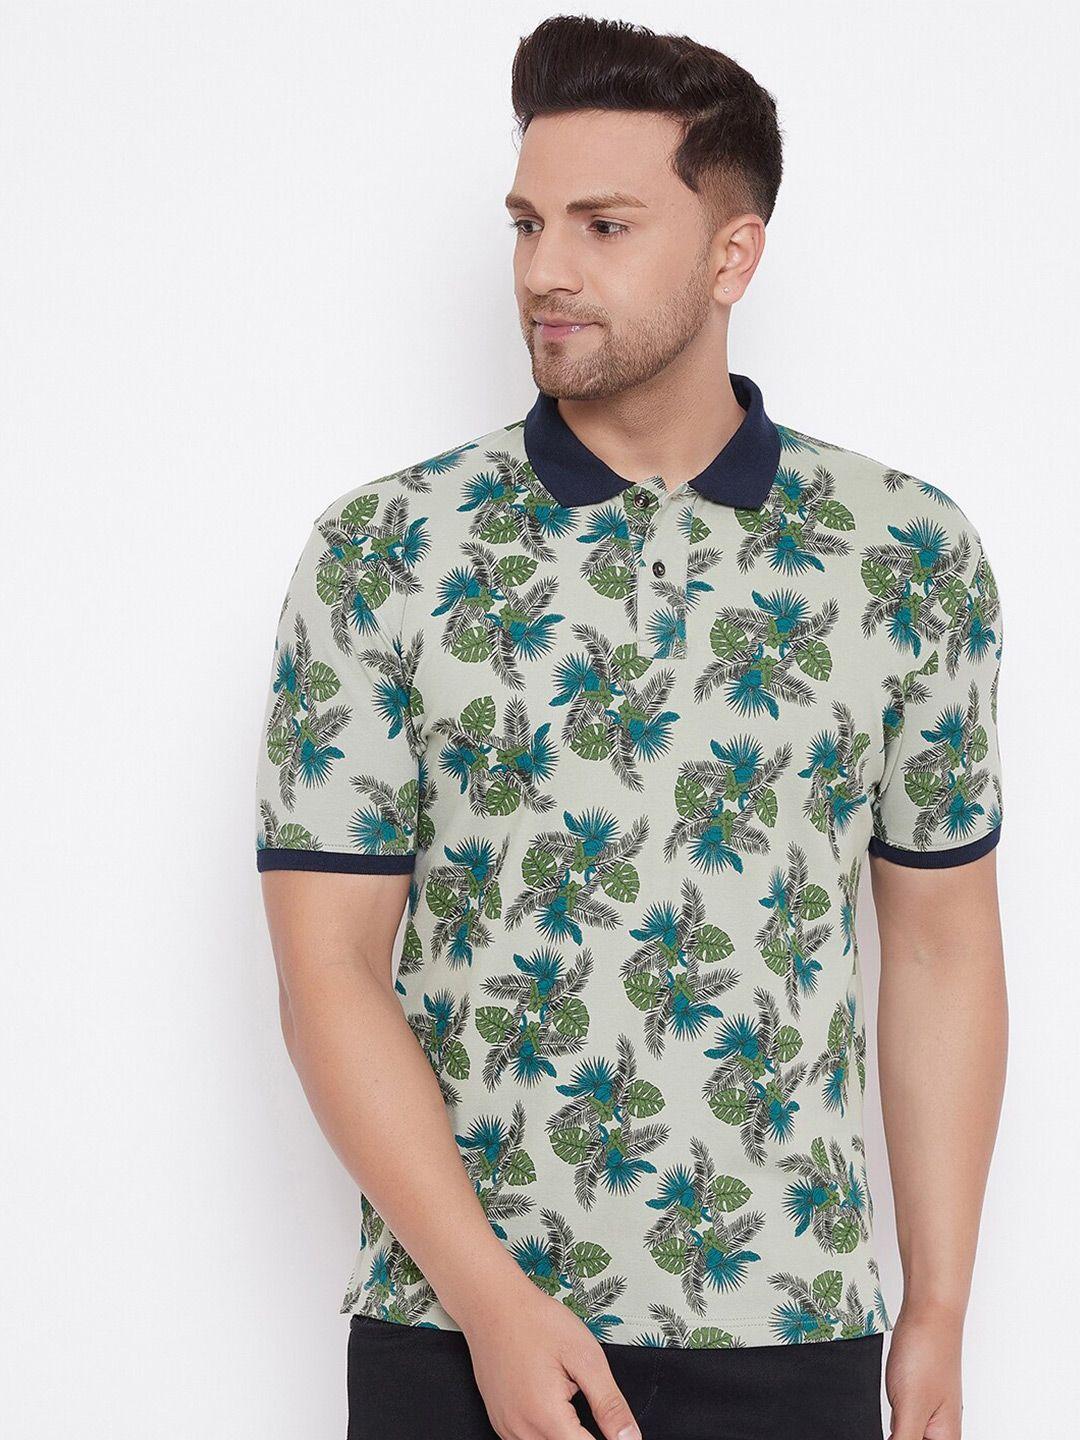 harbor-n-bay-men-olive-green-floral-printed-polo-collar-t-shirt